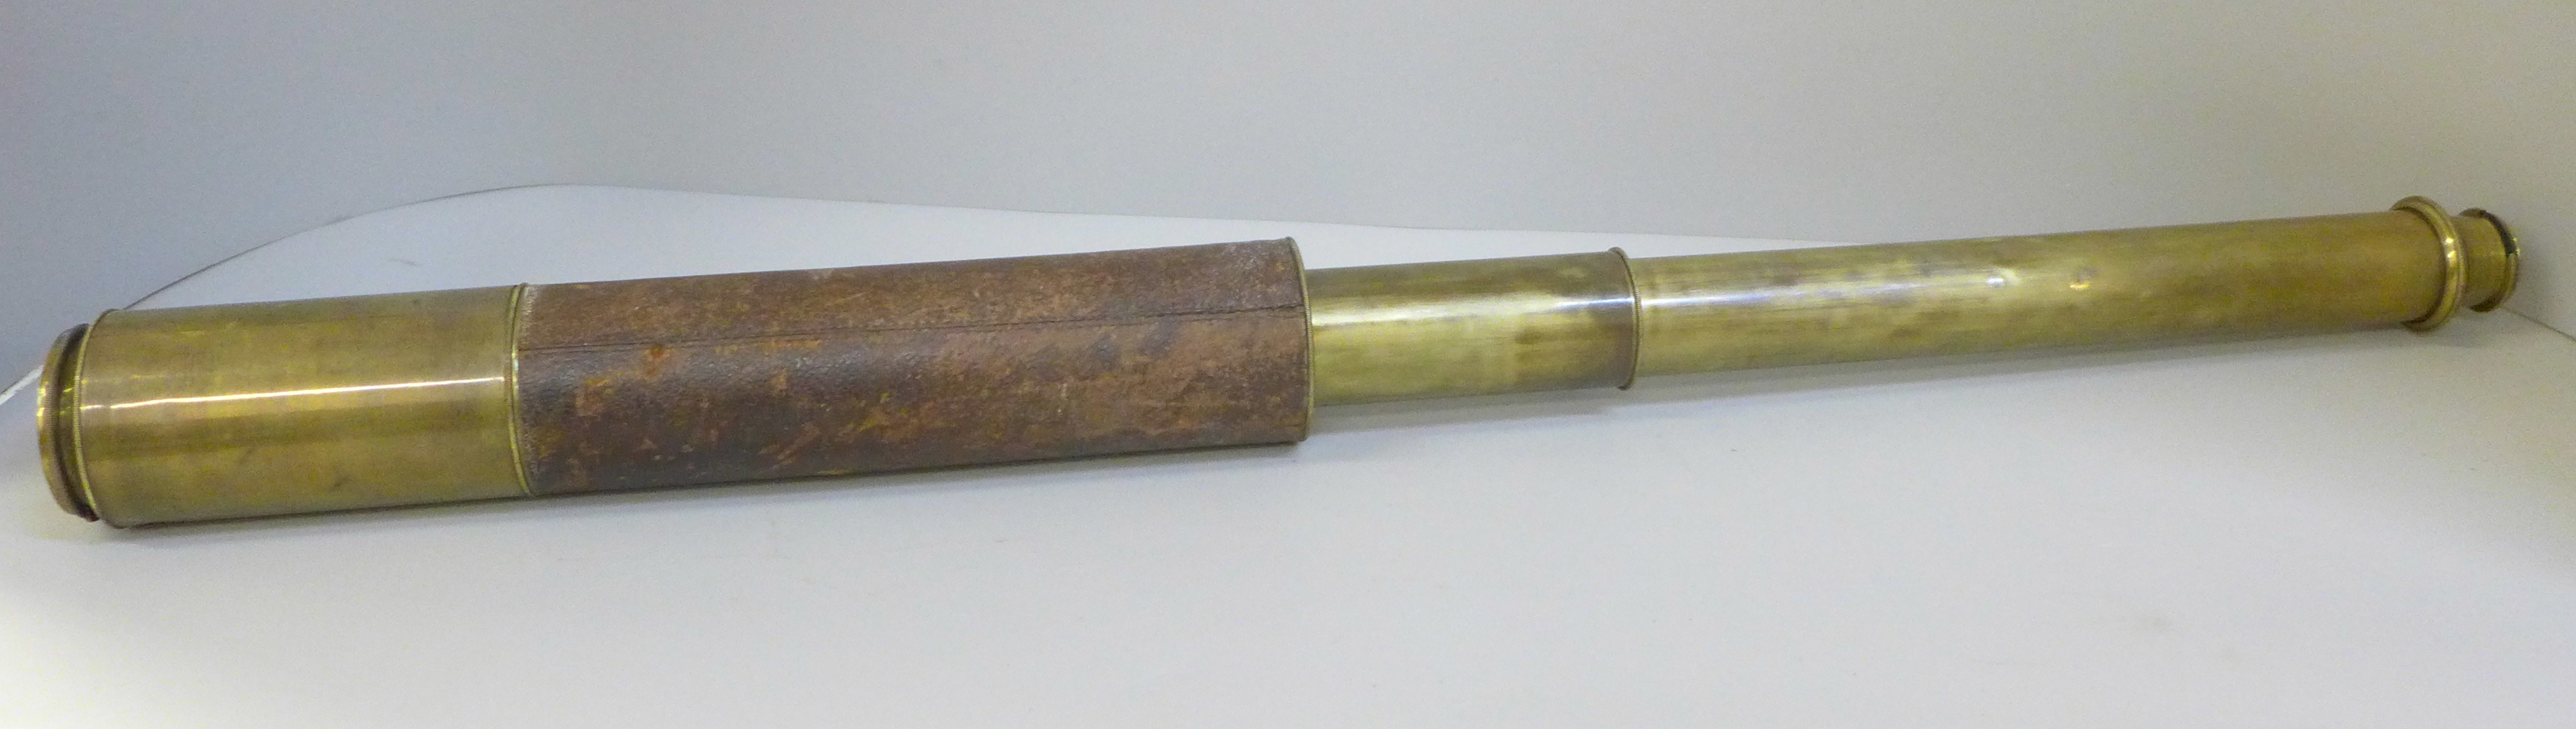 An Alfred J. Natali & Co. mid 19th Century telescope, brass body and leather covered - Image 3 of 3